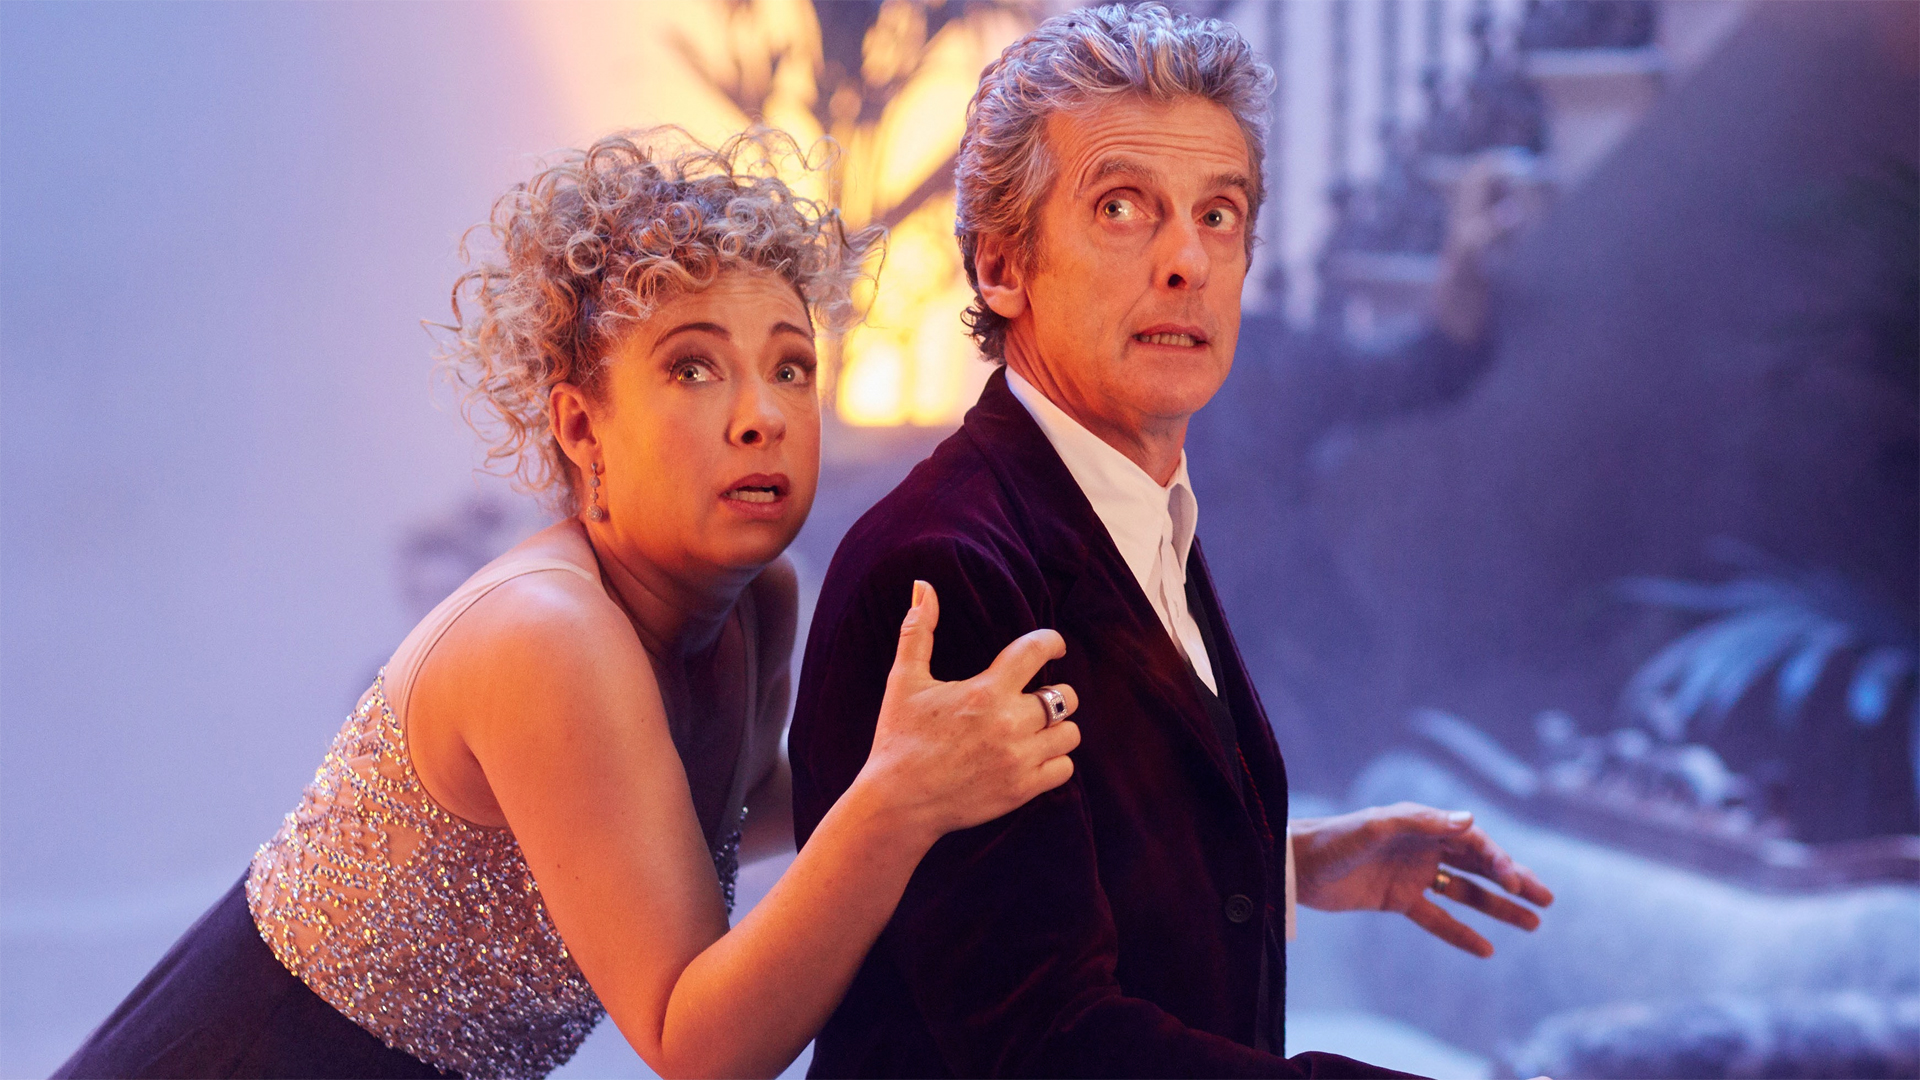 Doctor Whos Day Roundup A Song For River Song Anglophenia Bbc America